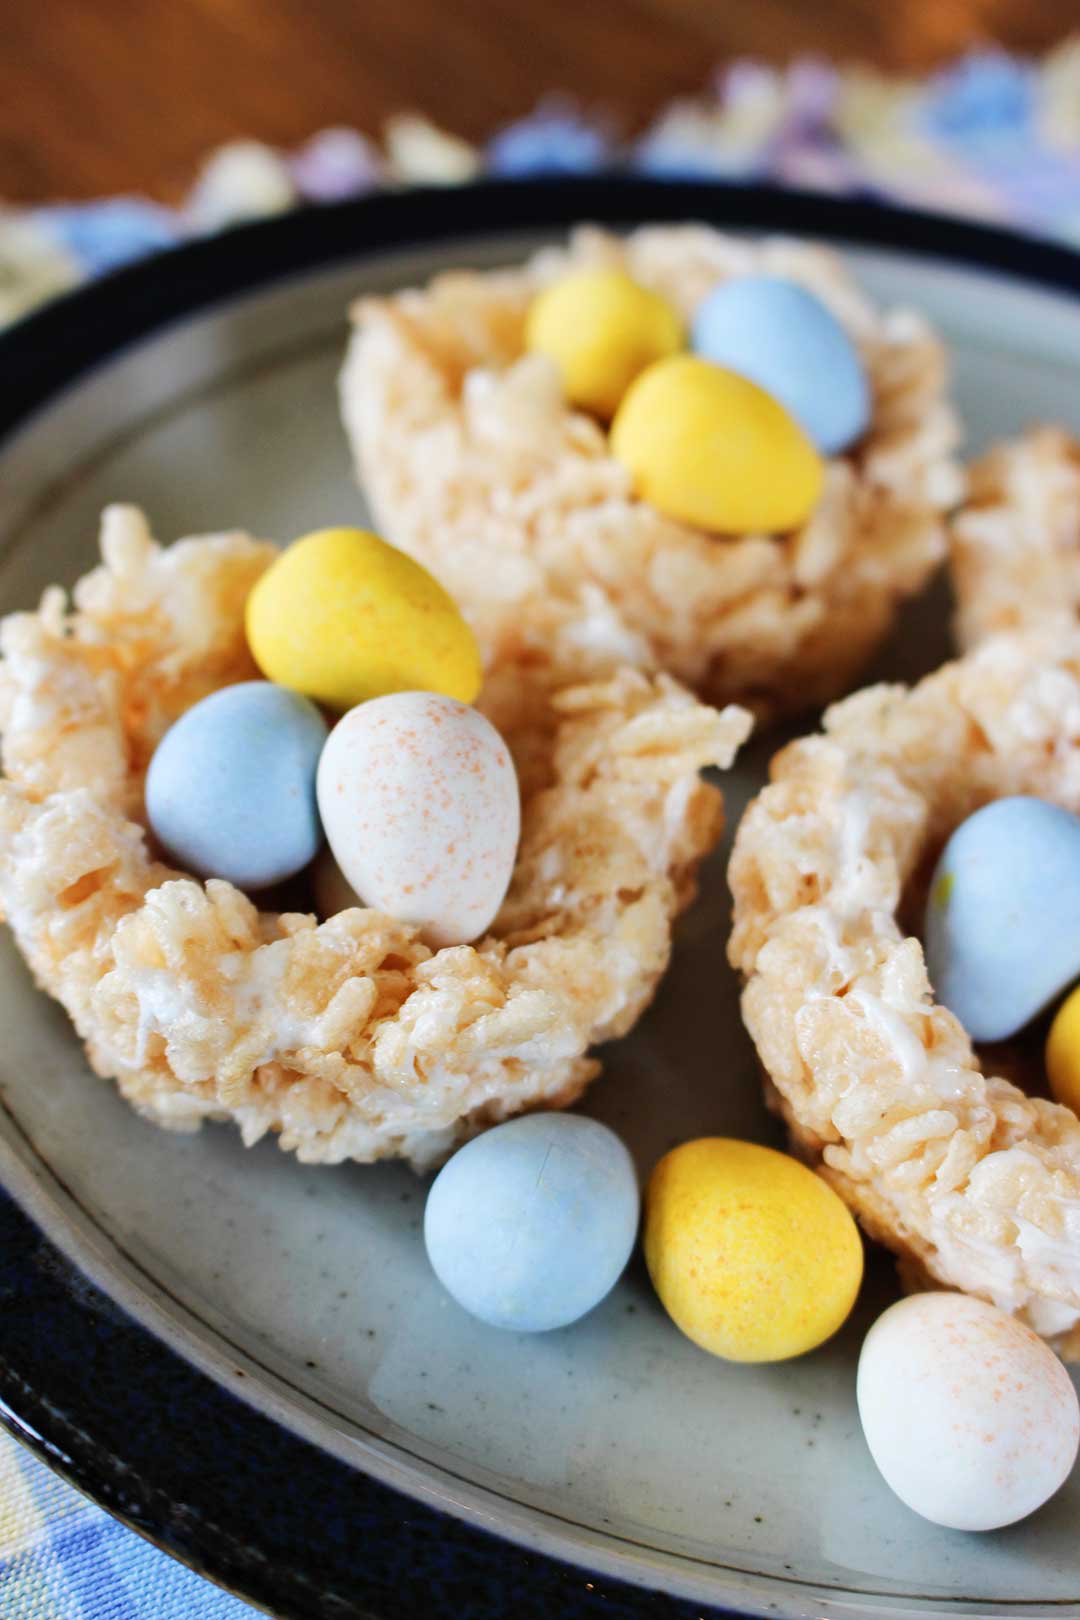 Several Rice Krispie Easter Nests with chocolate eggs inside sitting on a plate.